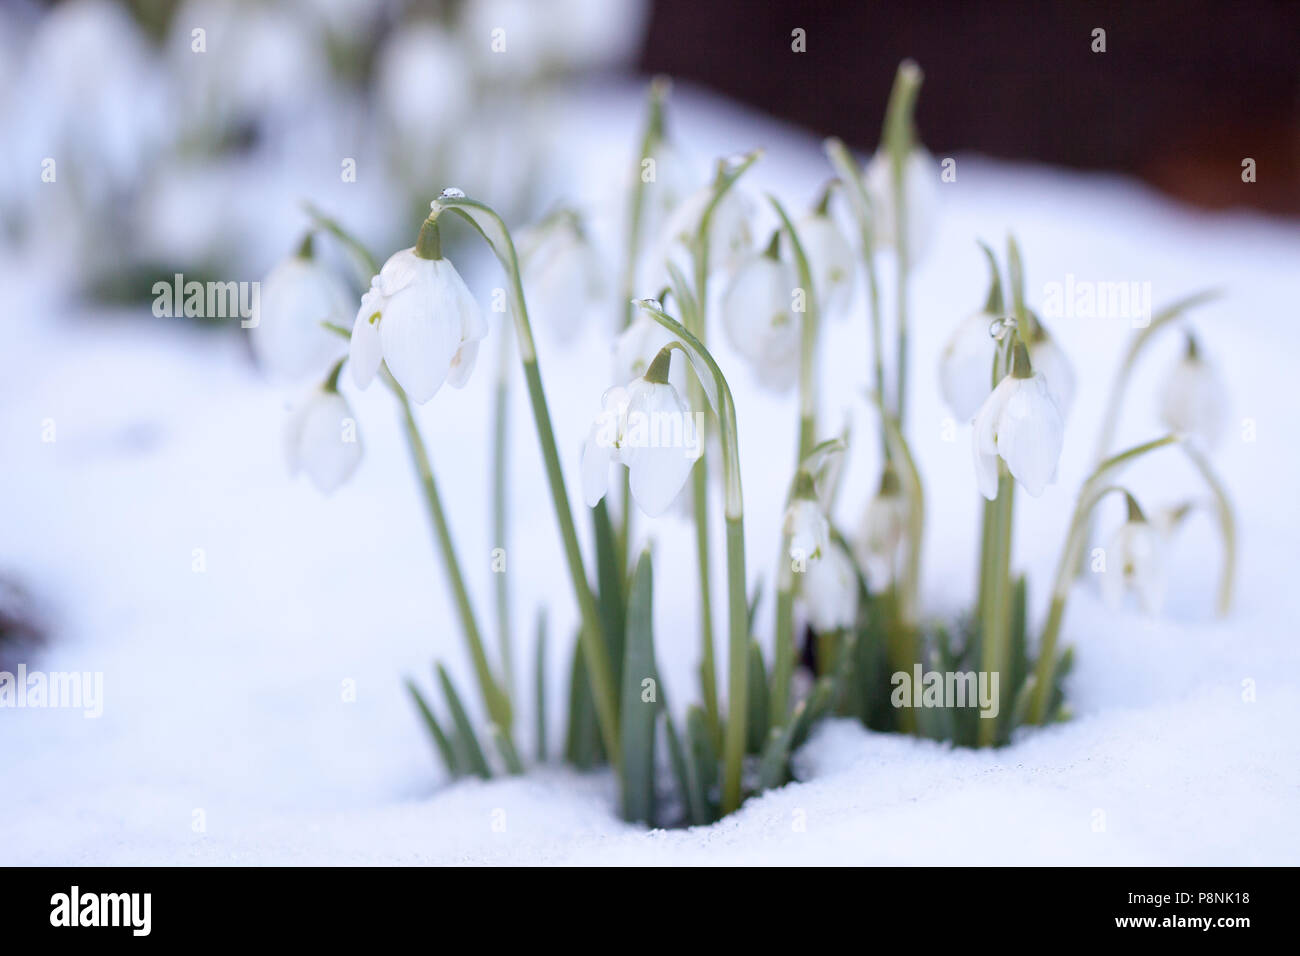 Clump of white snowdrop (Galanthus sp.) flowers in the snow Stock Photo